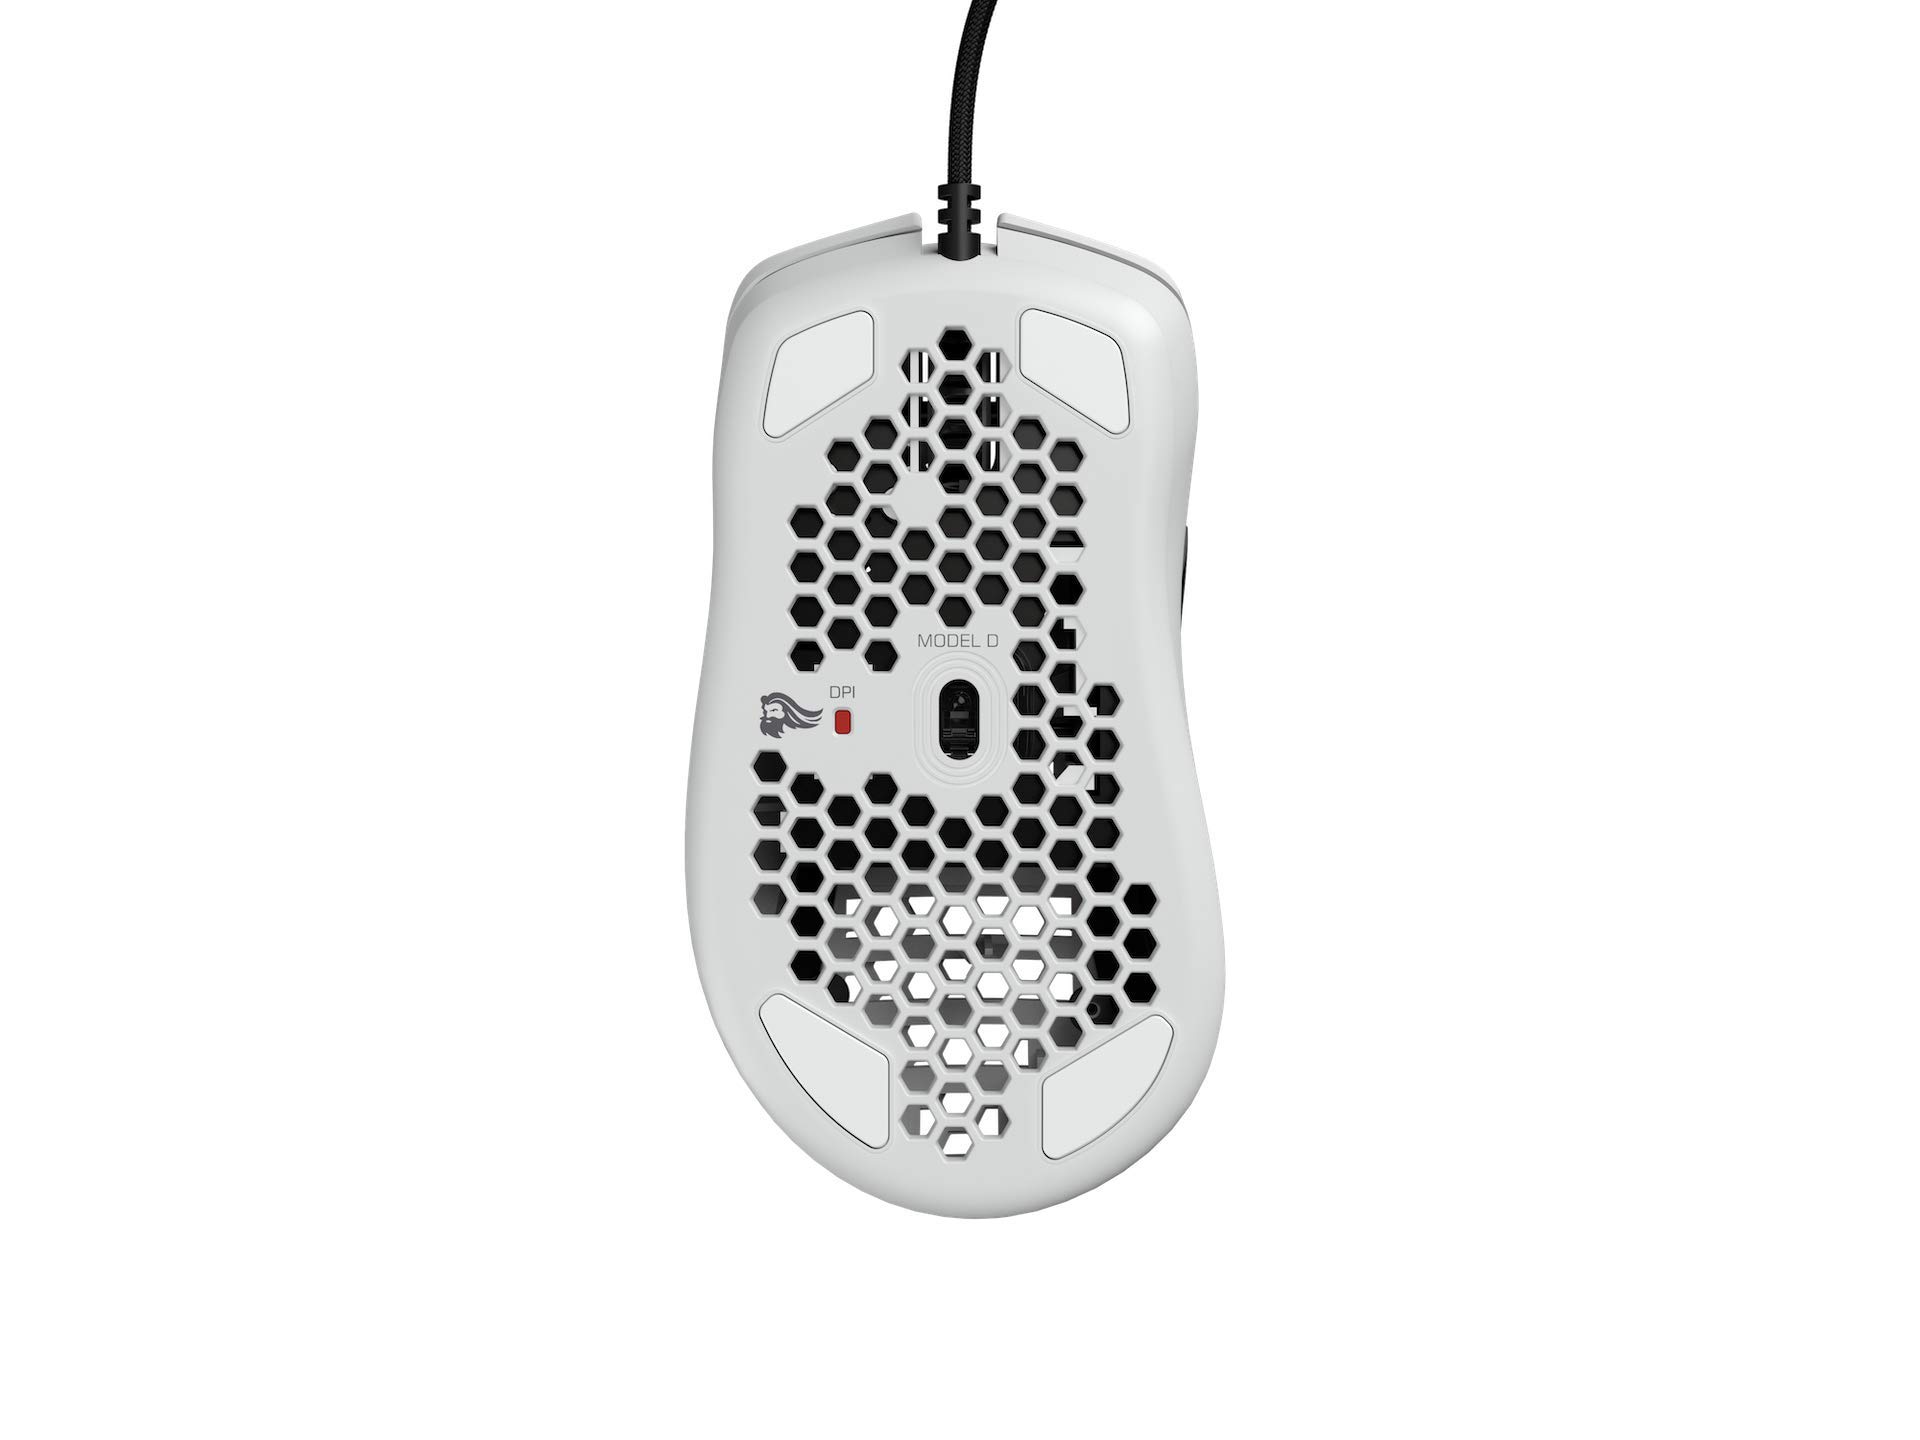 Glorious Gaming Mouse - Glorious Model D Honeycomb Mouse - Superlight RGB PC Mouse - 68 g - Matte White Wired Mouse